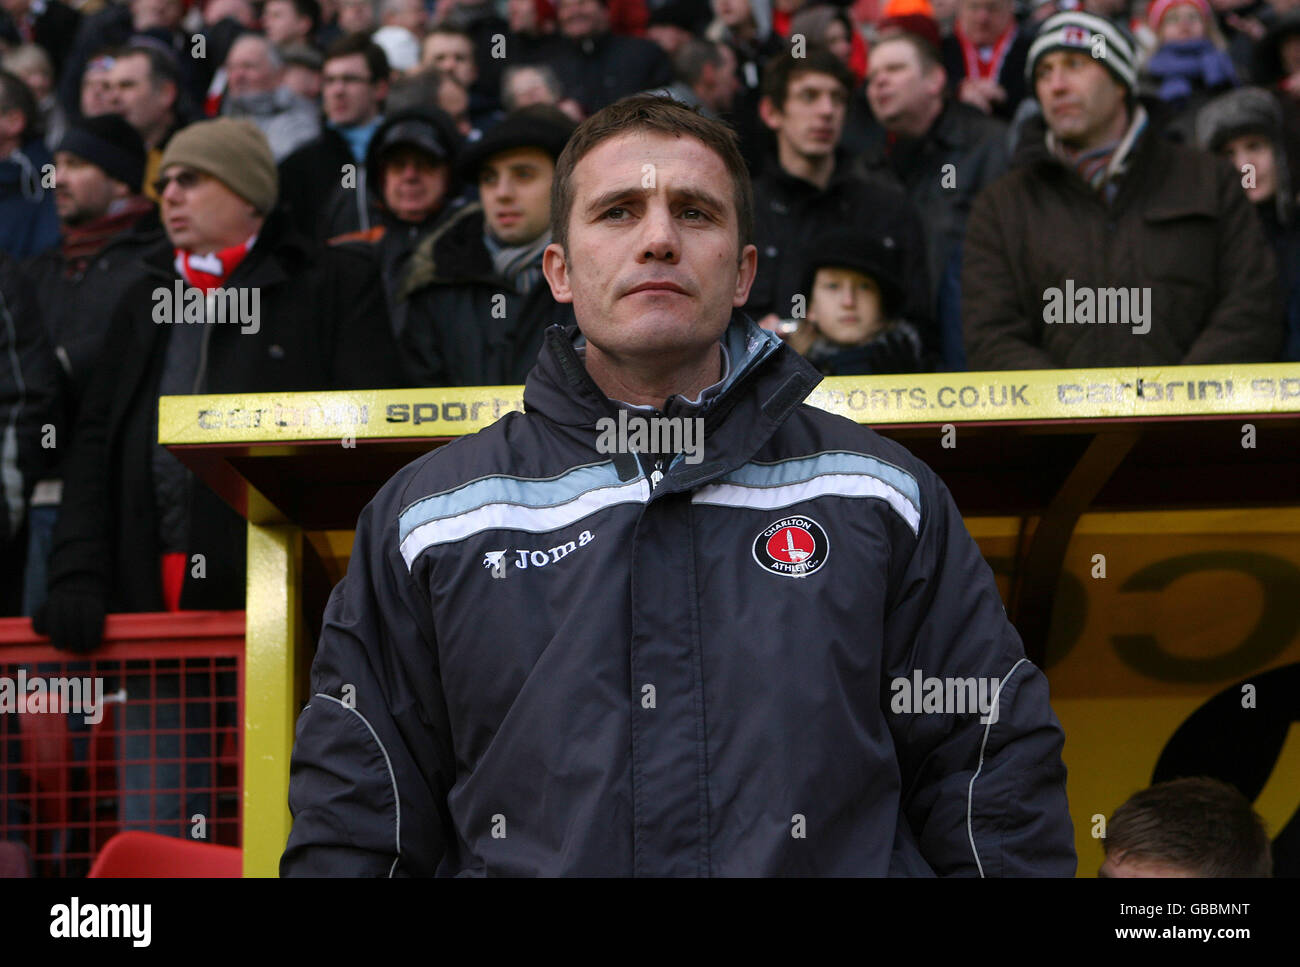 Soccer - Coca-Cola Football League Championship - Charlton Athletic v Nottingham Forest - The Valley. Charlton Athletic's manager Phil Parkinson during the Coca-Cola Championship match at The Valley, Charlton. Stock Photo